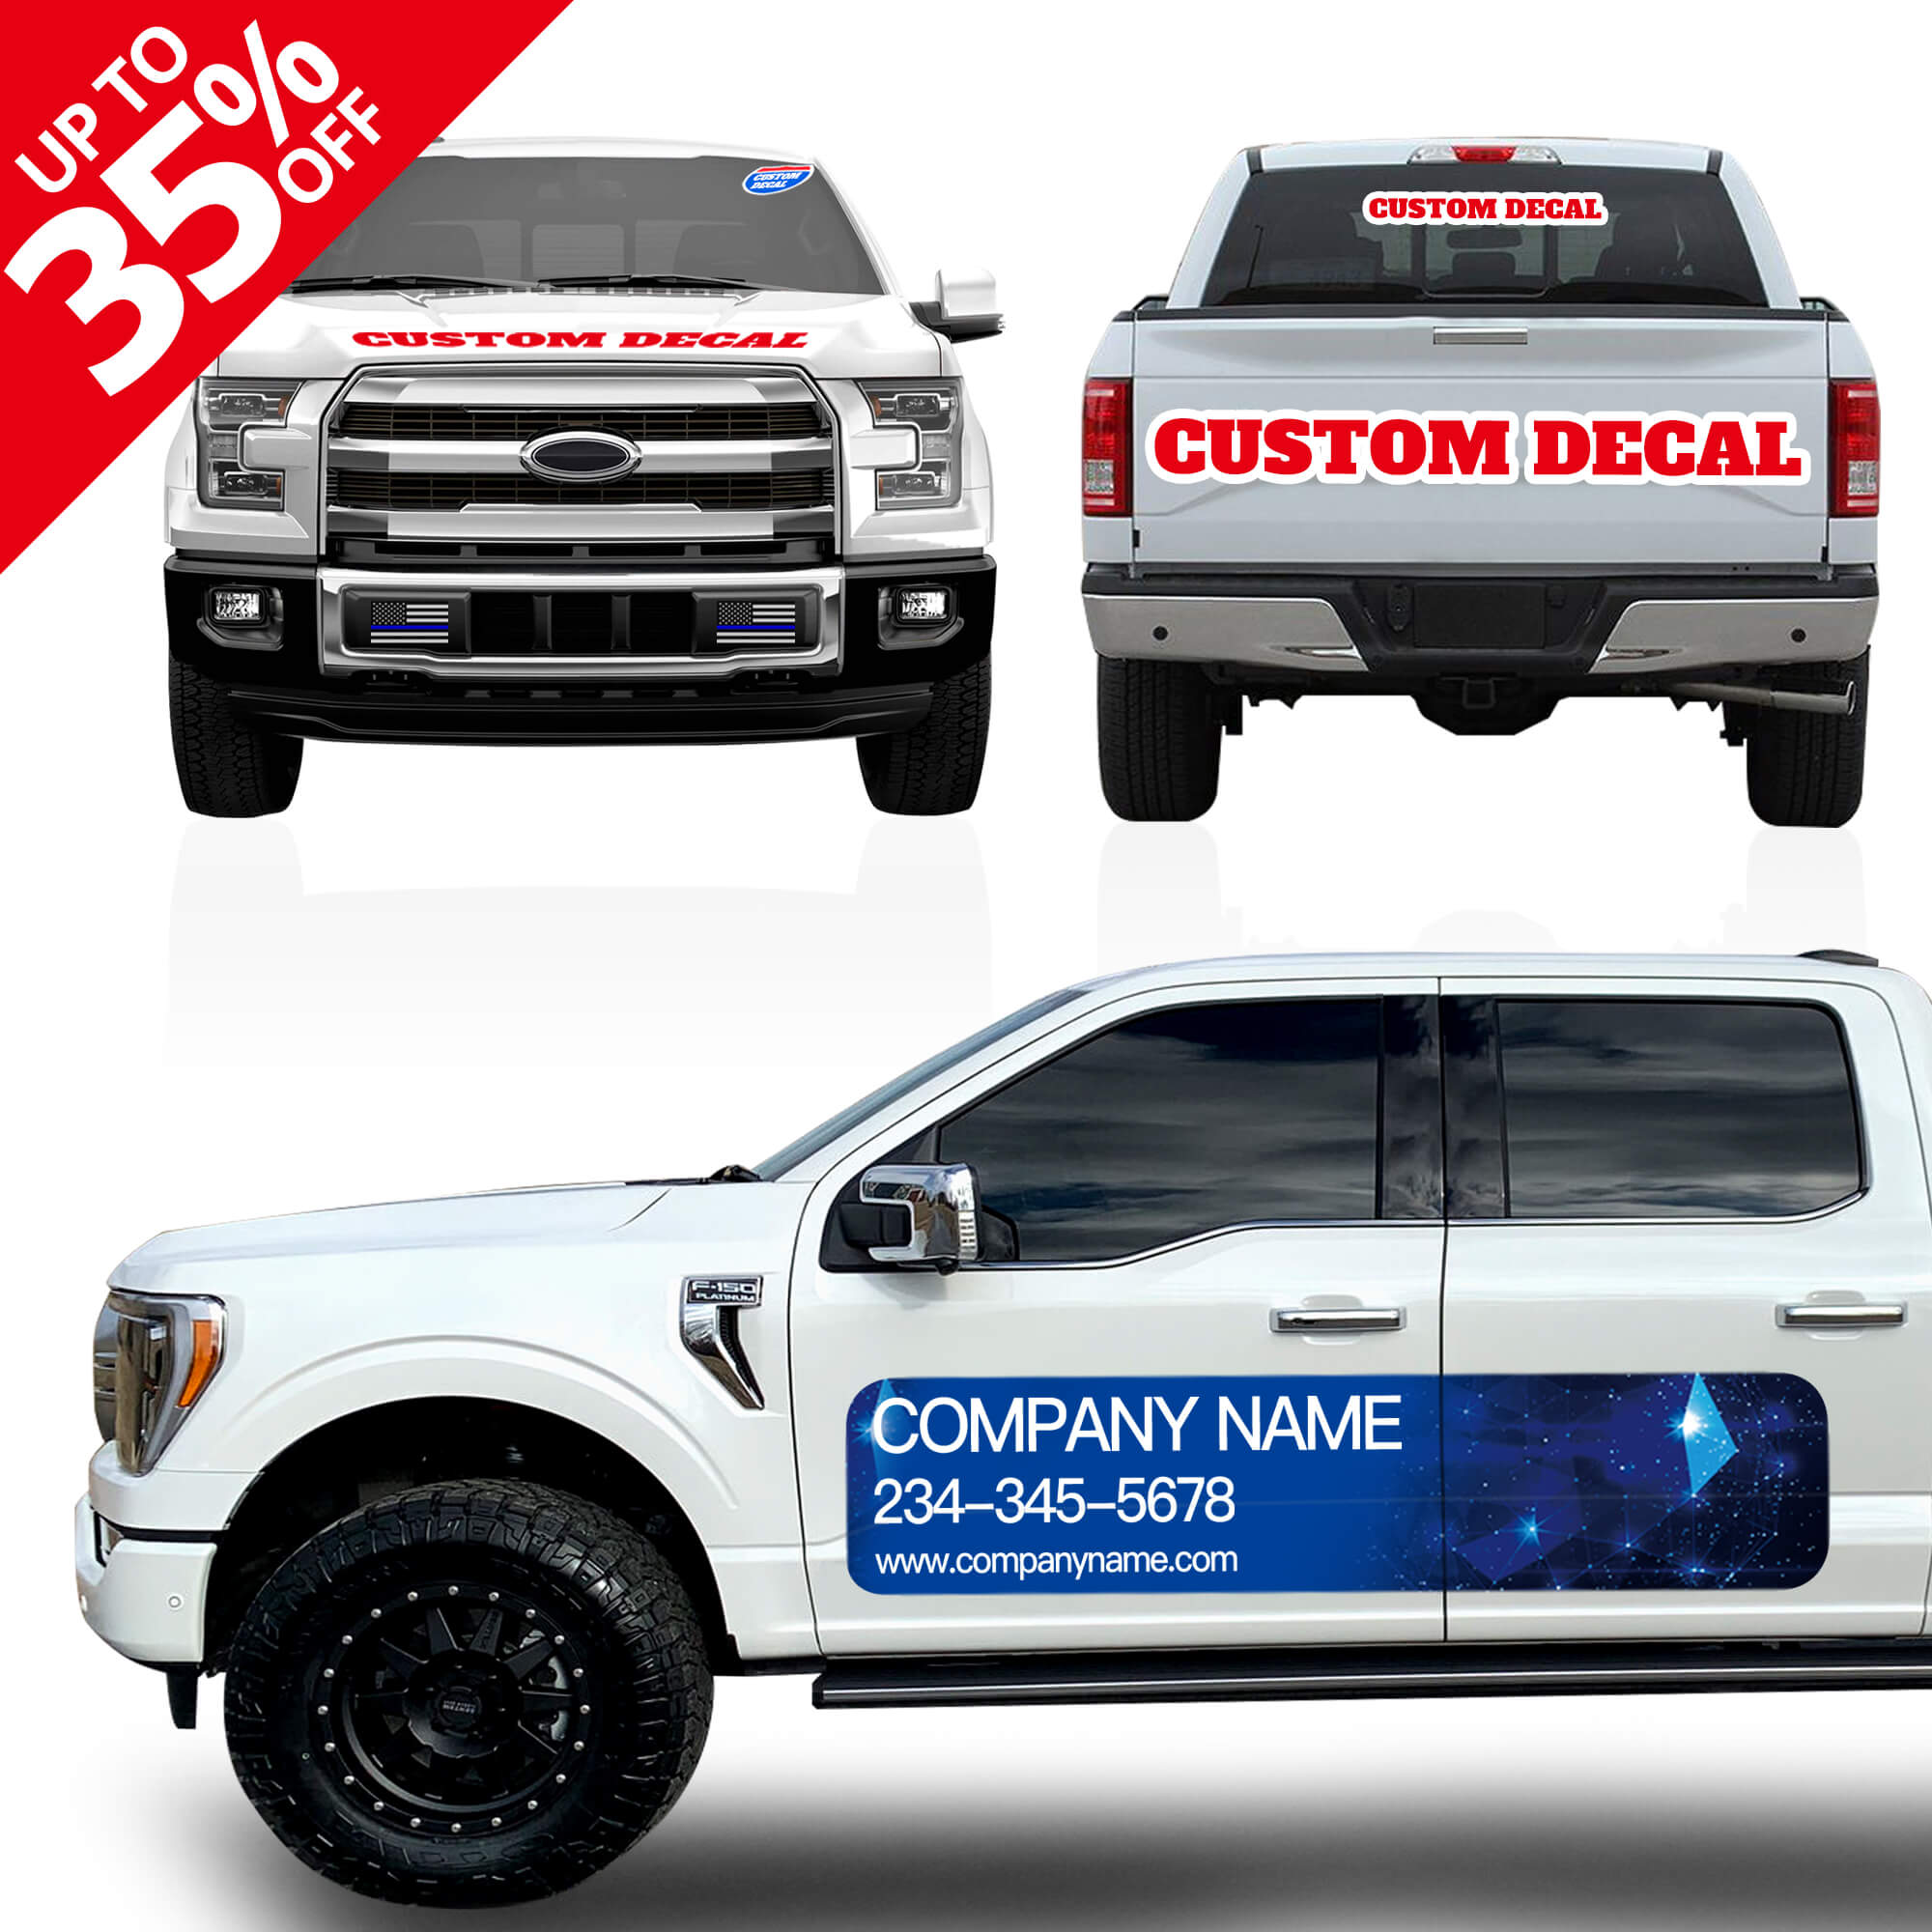 Front-Adhesive Stickers - Window, Windshield & Glass Decals